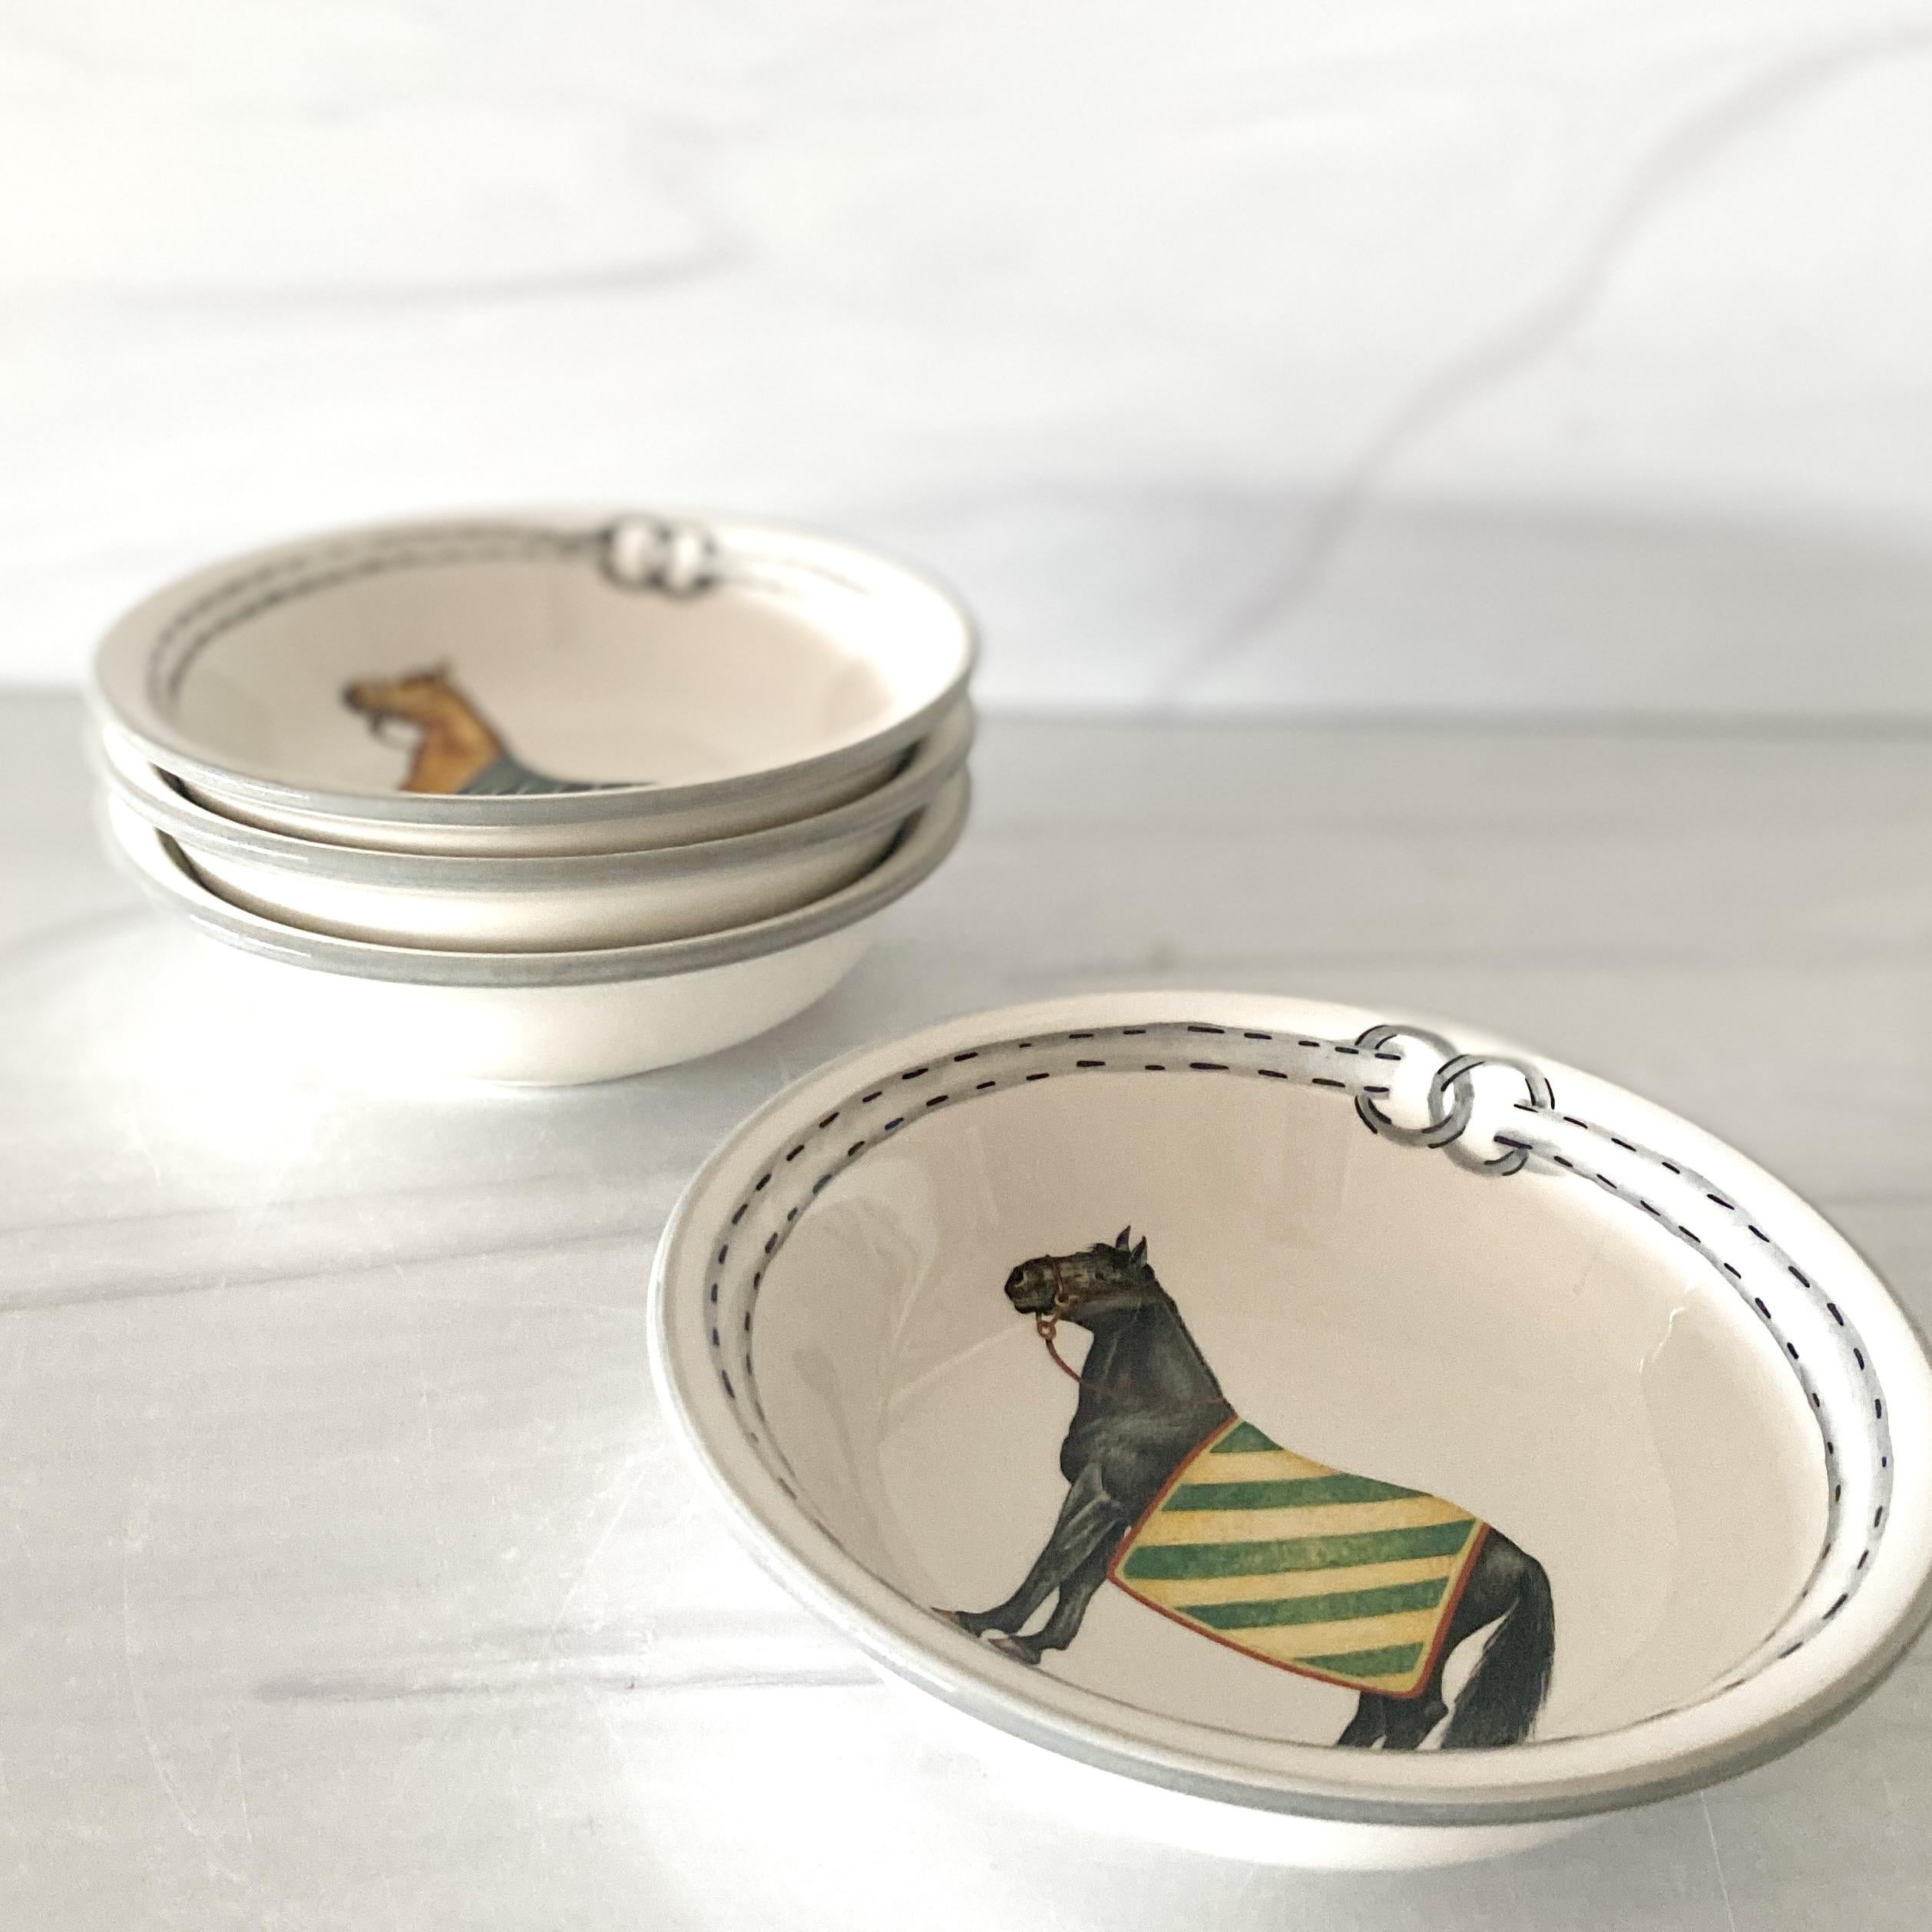 Contemporary Devon Equestrian Small Bowls S/4, Made in Italy For Sale